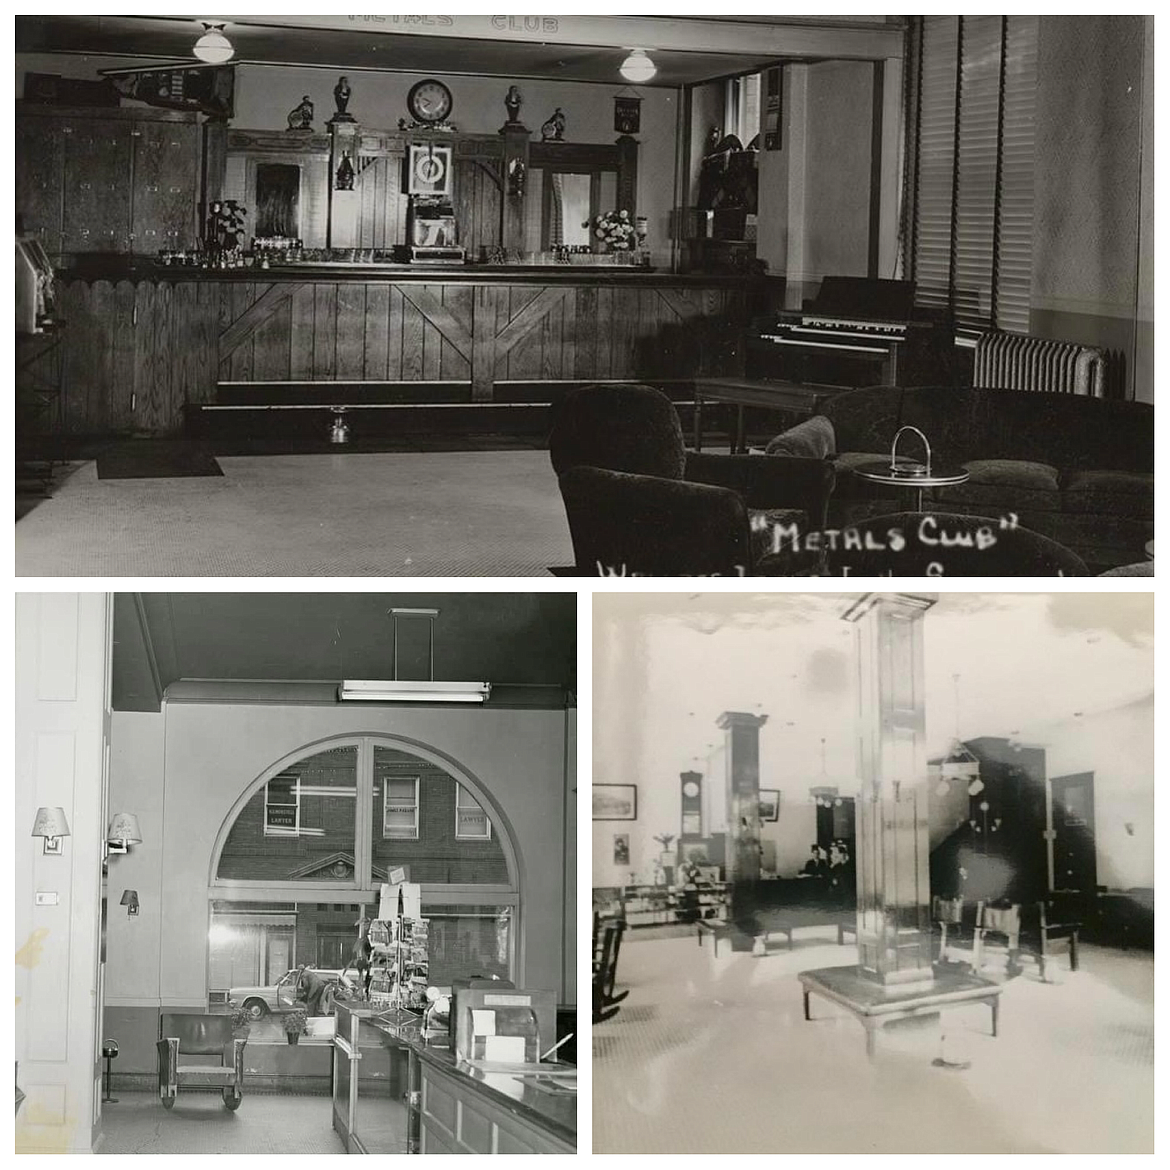 Scenes from the lobby of the Samuels Hotel, including the original Metals Bar (top), which was moved two more times before landing at its current location. The hotel was a major part of the social life in Wallace.